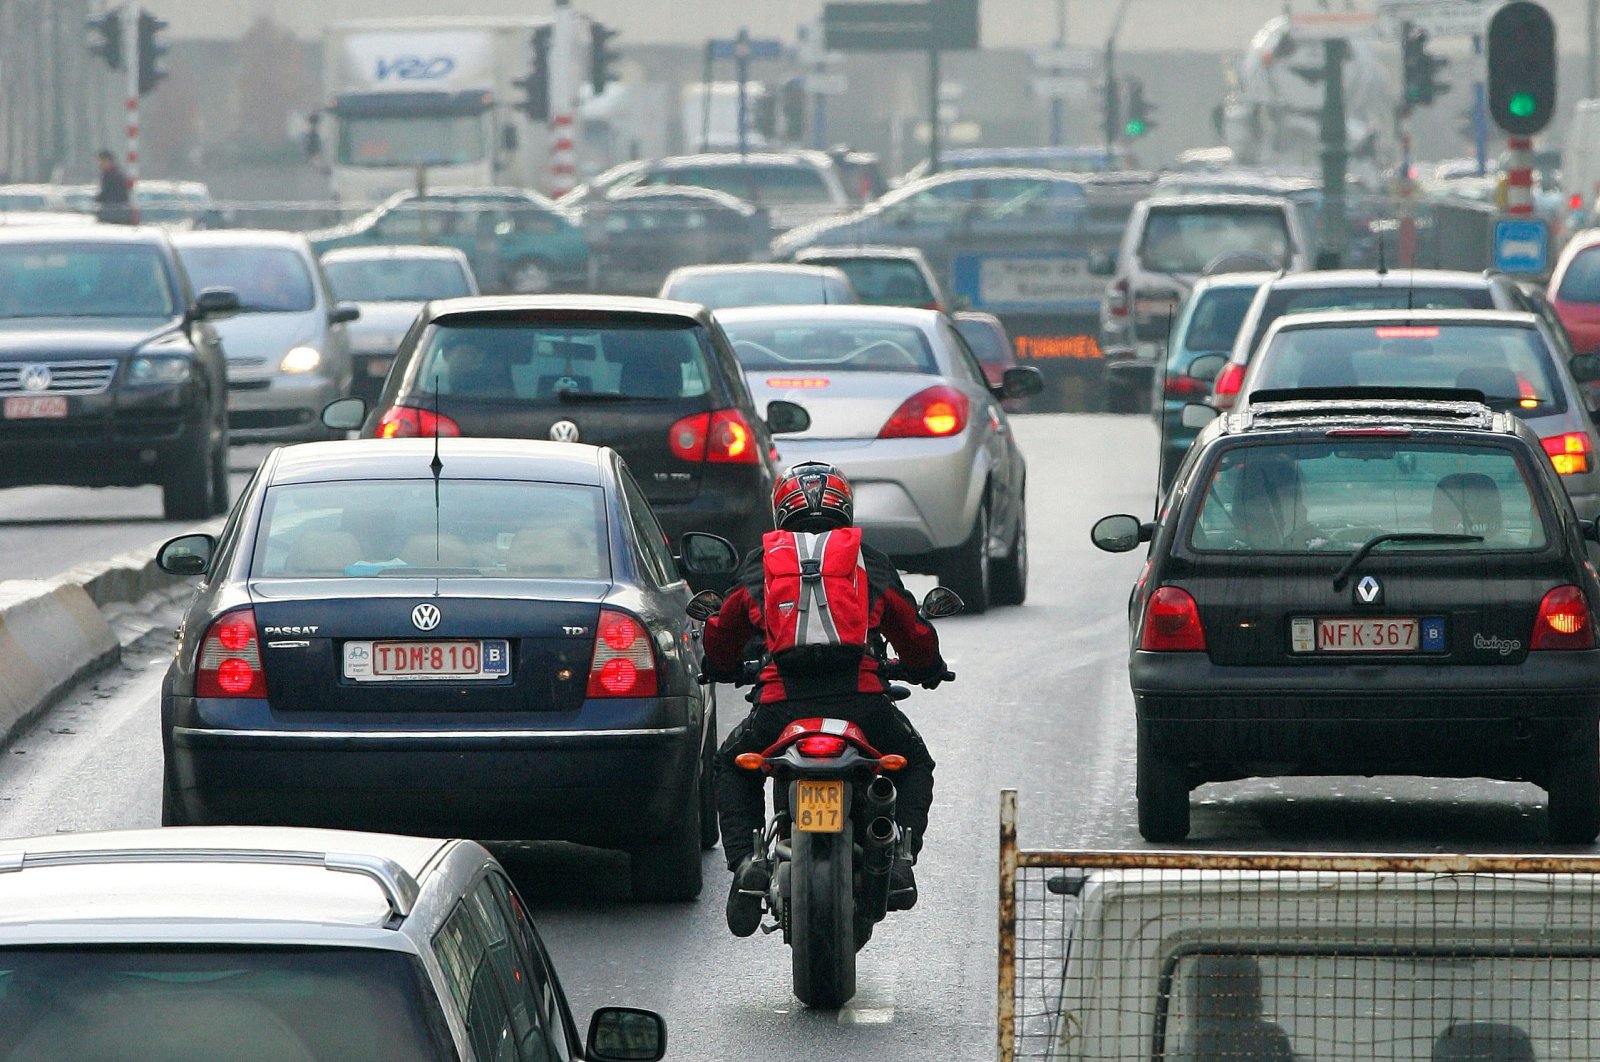 Cars drive along a road in central Brussels, Belgium, Feb. 7, 2007. (Reuters Photo)